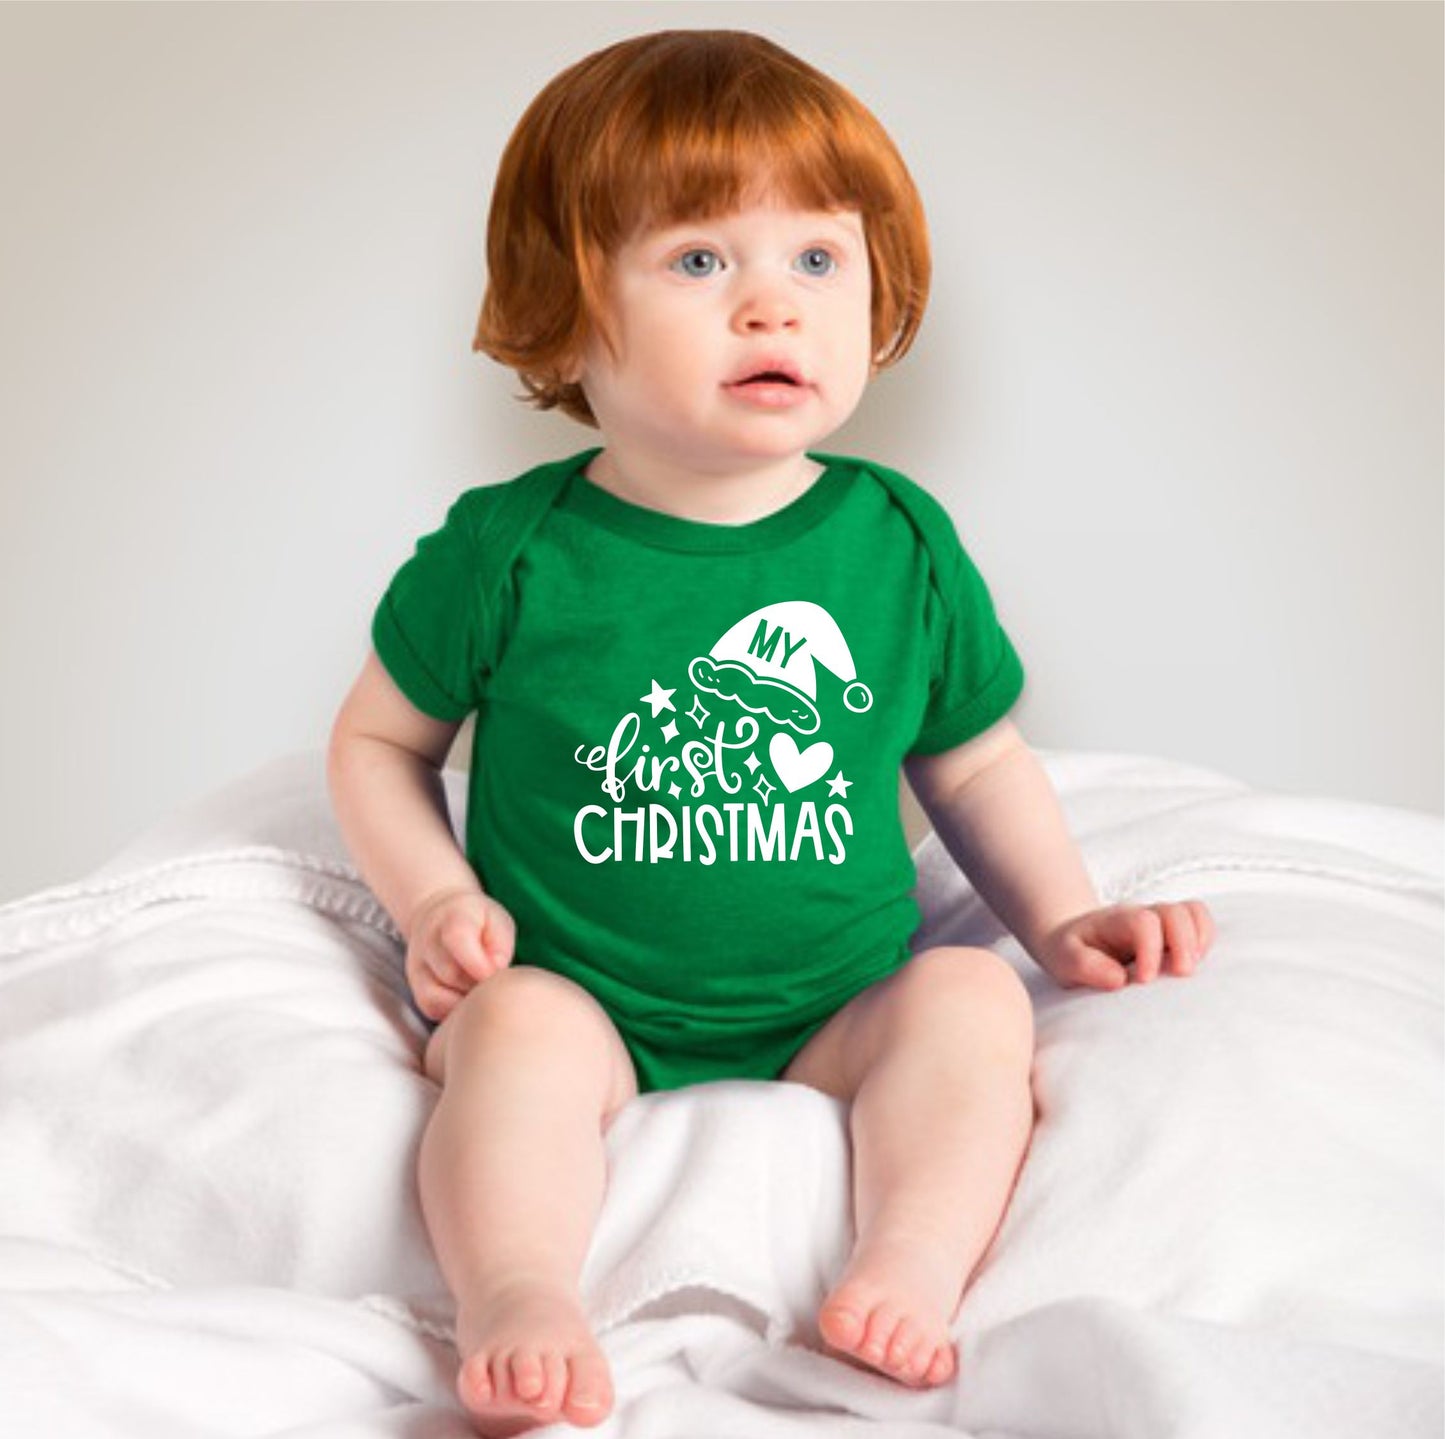 Baby Christmas Holiday Onesies - My First Christmas Hearts and Santa Hat